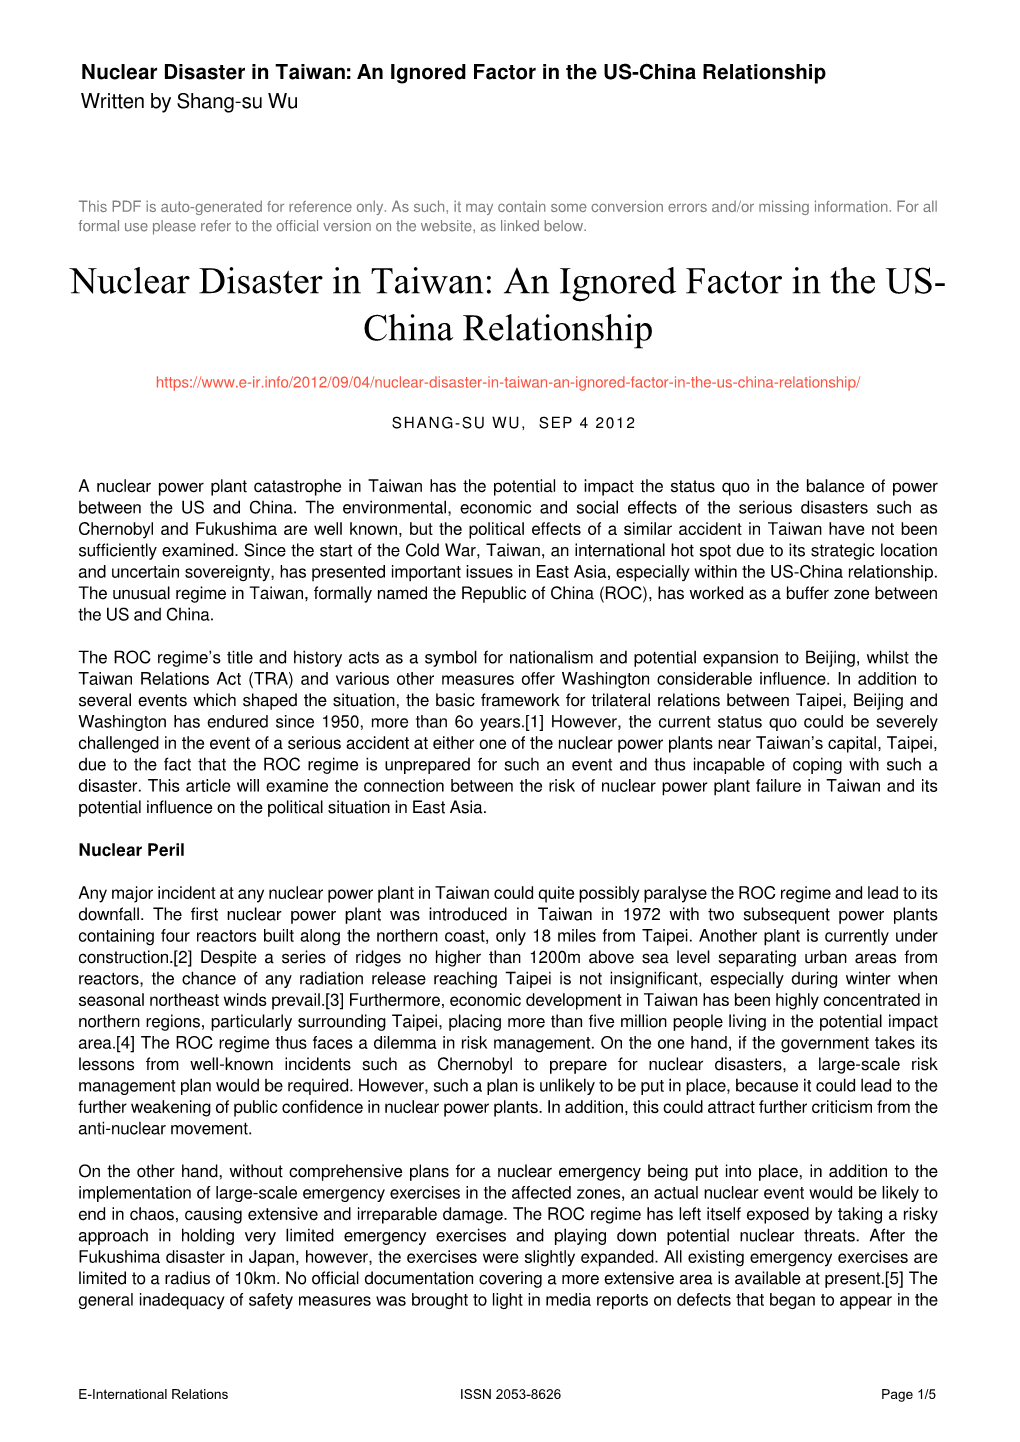 Nuclear Disaster in Taiwan: an Ignored Factor in the US-China Relationship Written by Shang-Su Wu